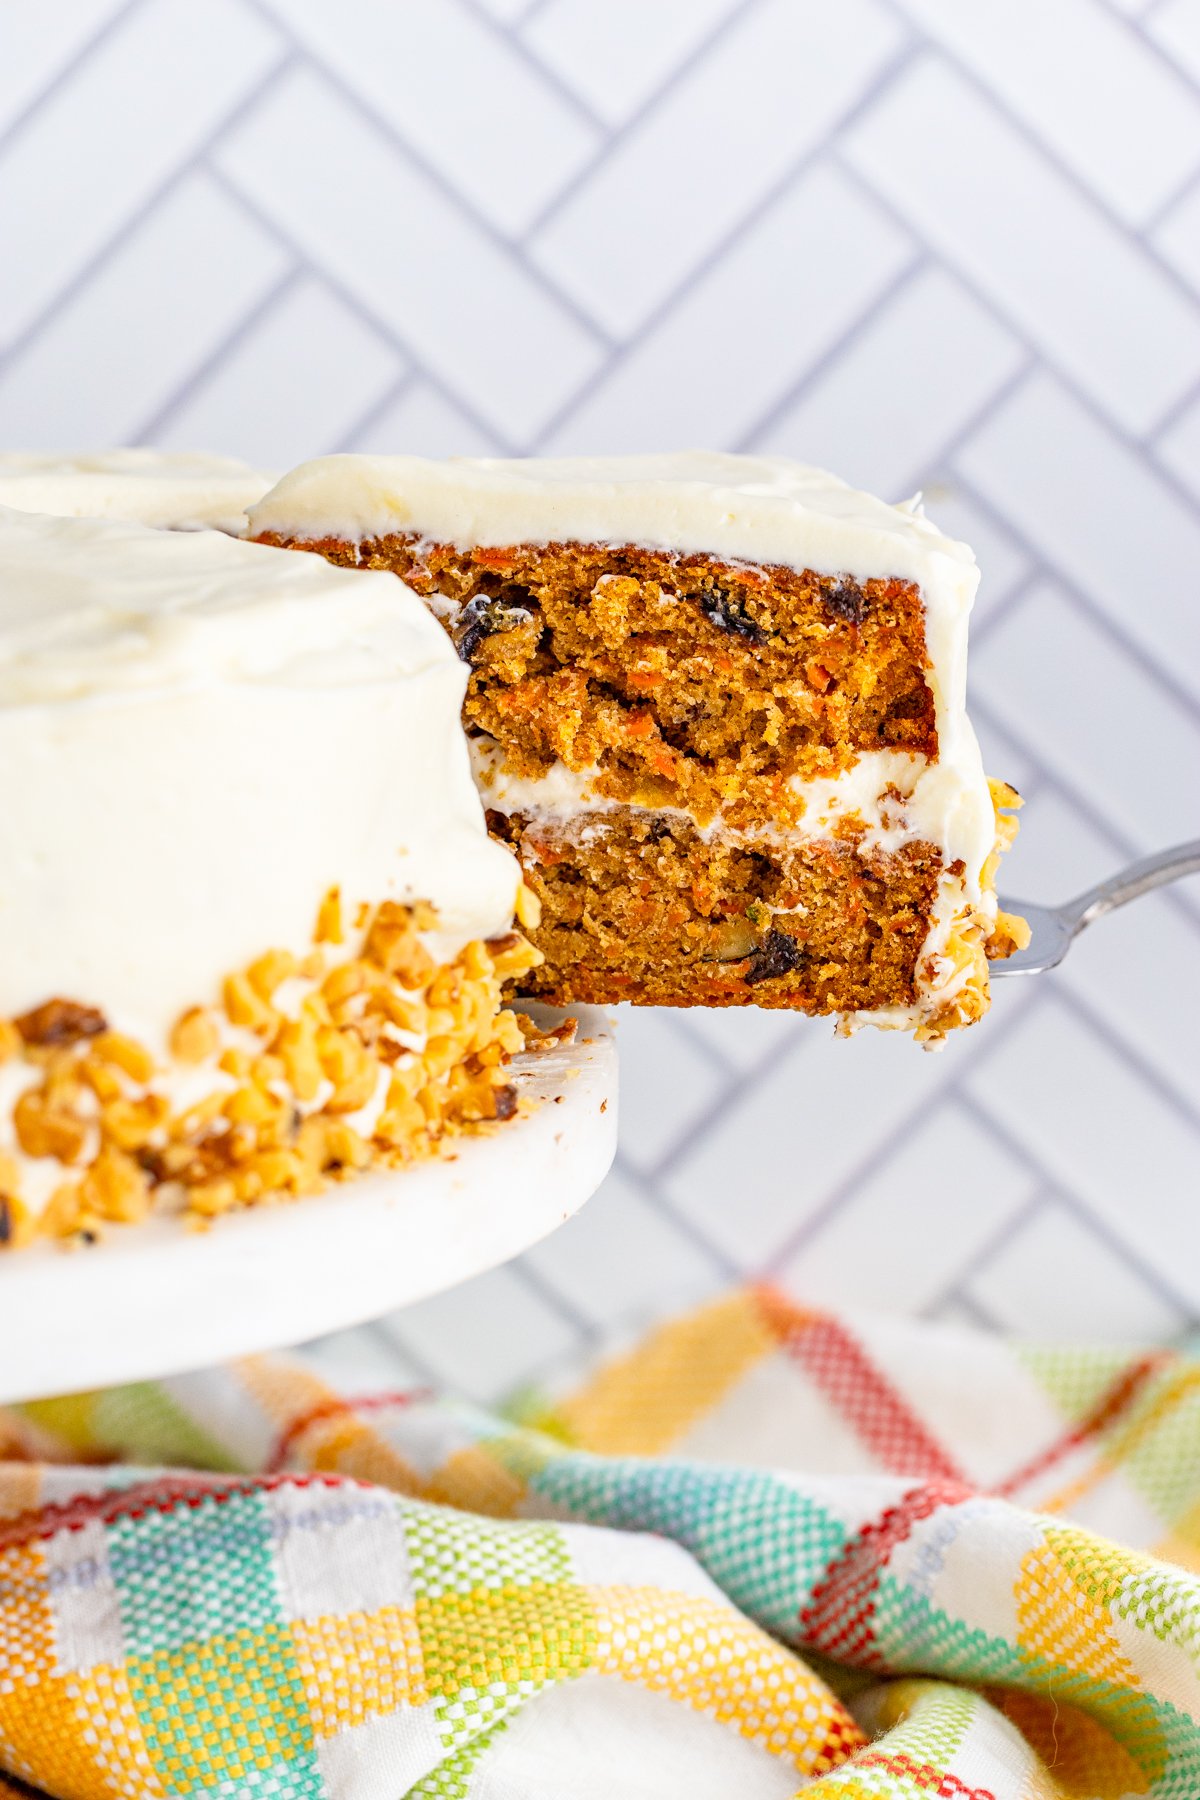 Cake server pulling out slice of Carrot Cake